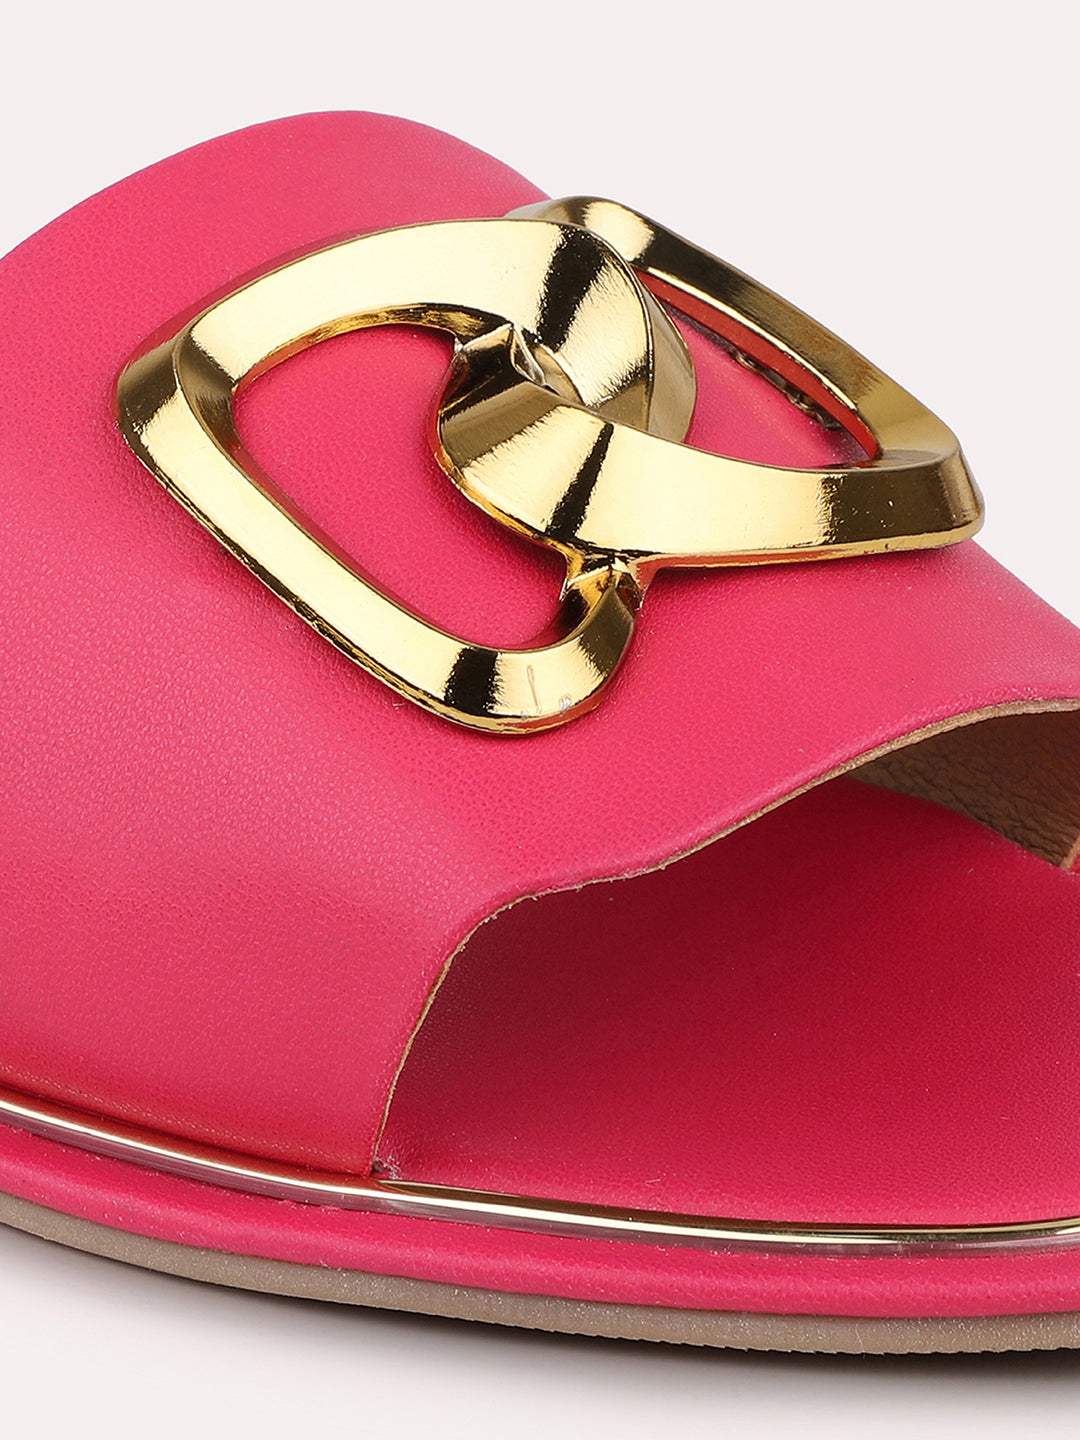 Women Pink And Gold-Toned Buckled Open Toe Flats